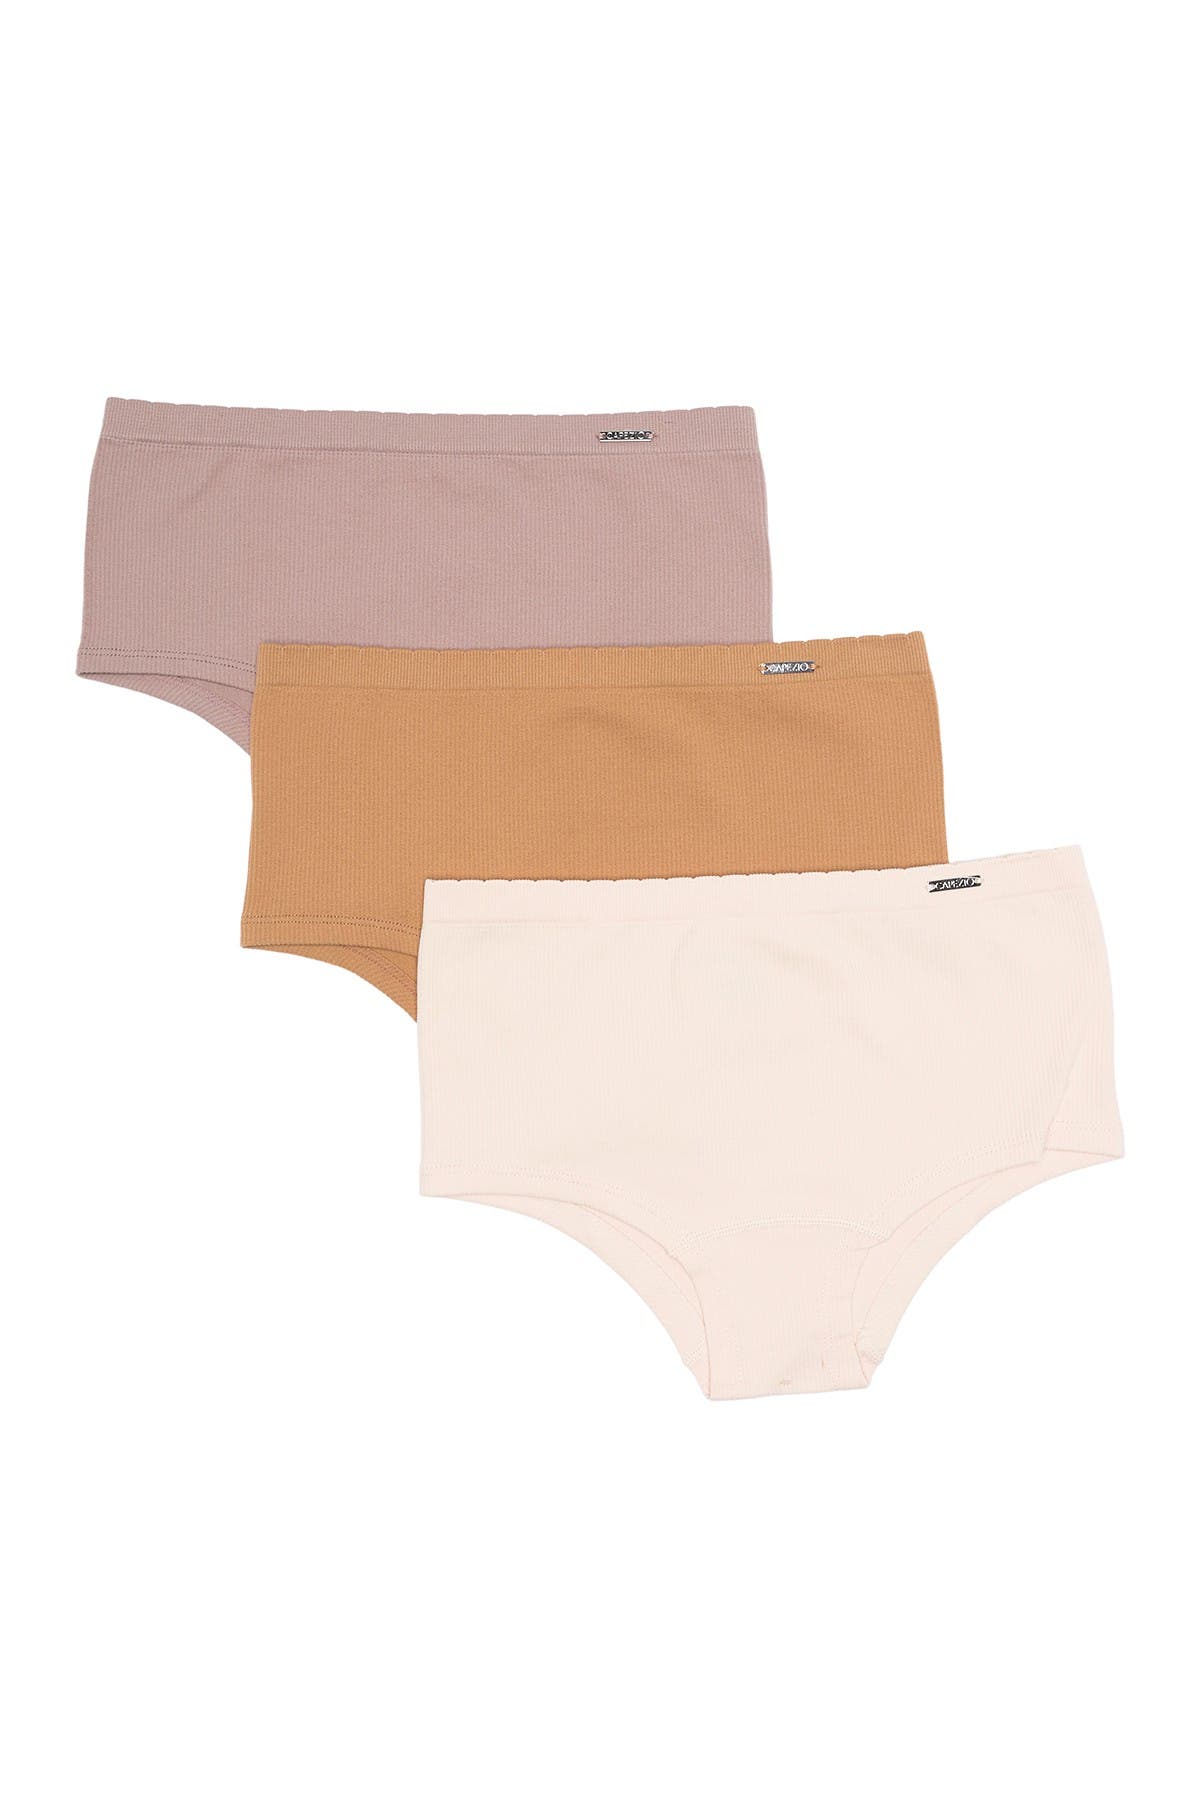 Studio By Capezio Seamless Ribbed Panties In Caramel/ L.pink/bark